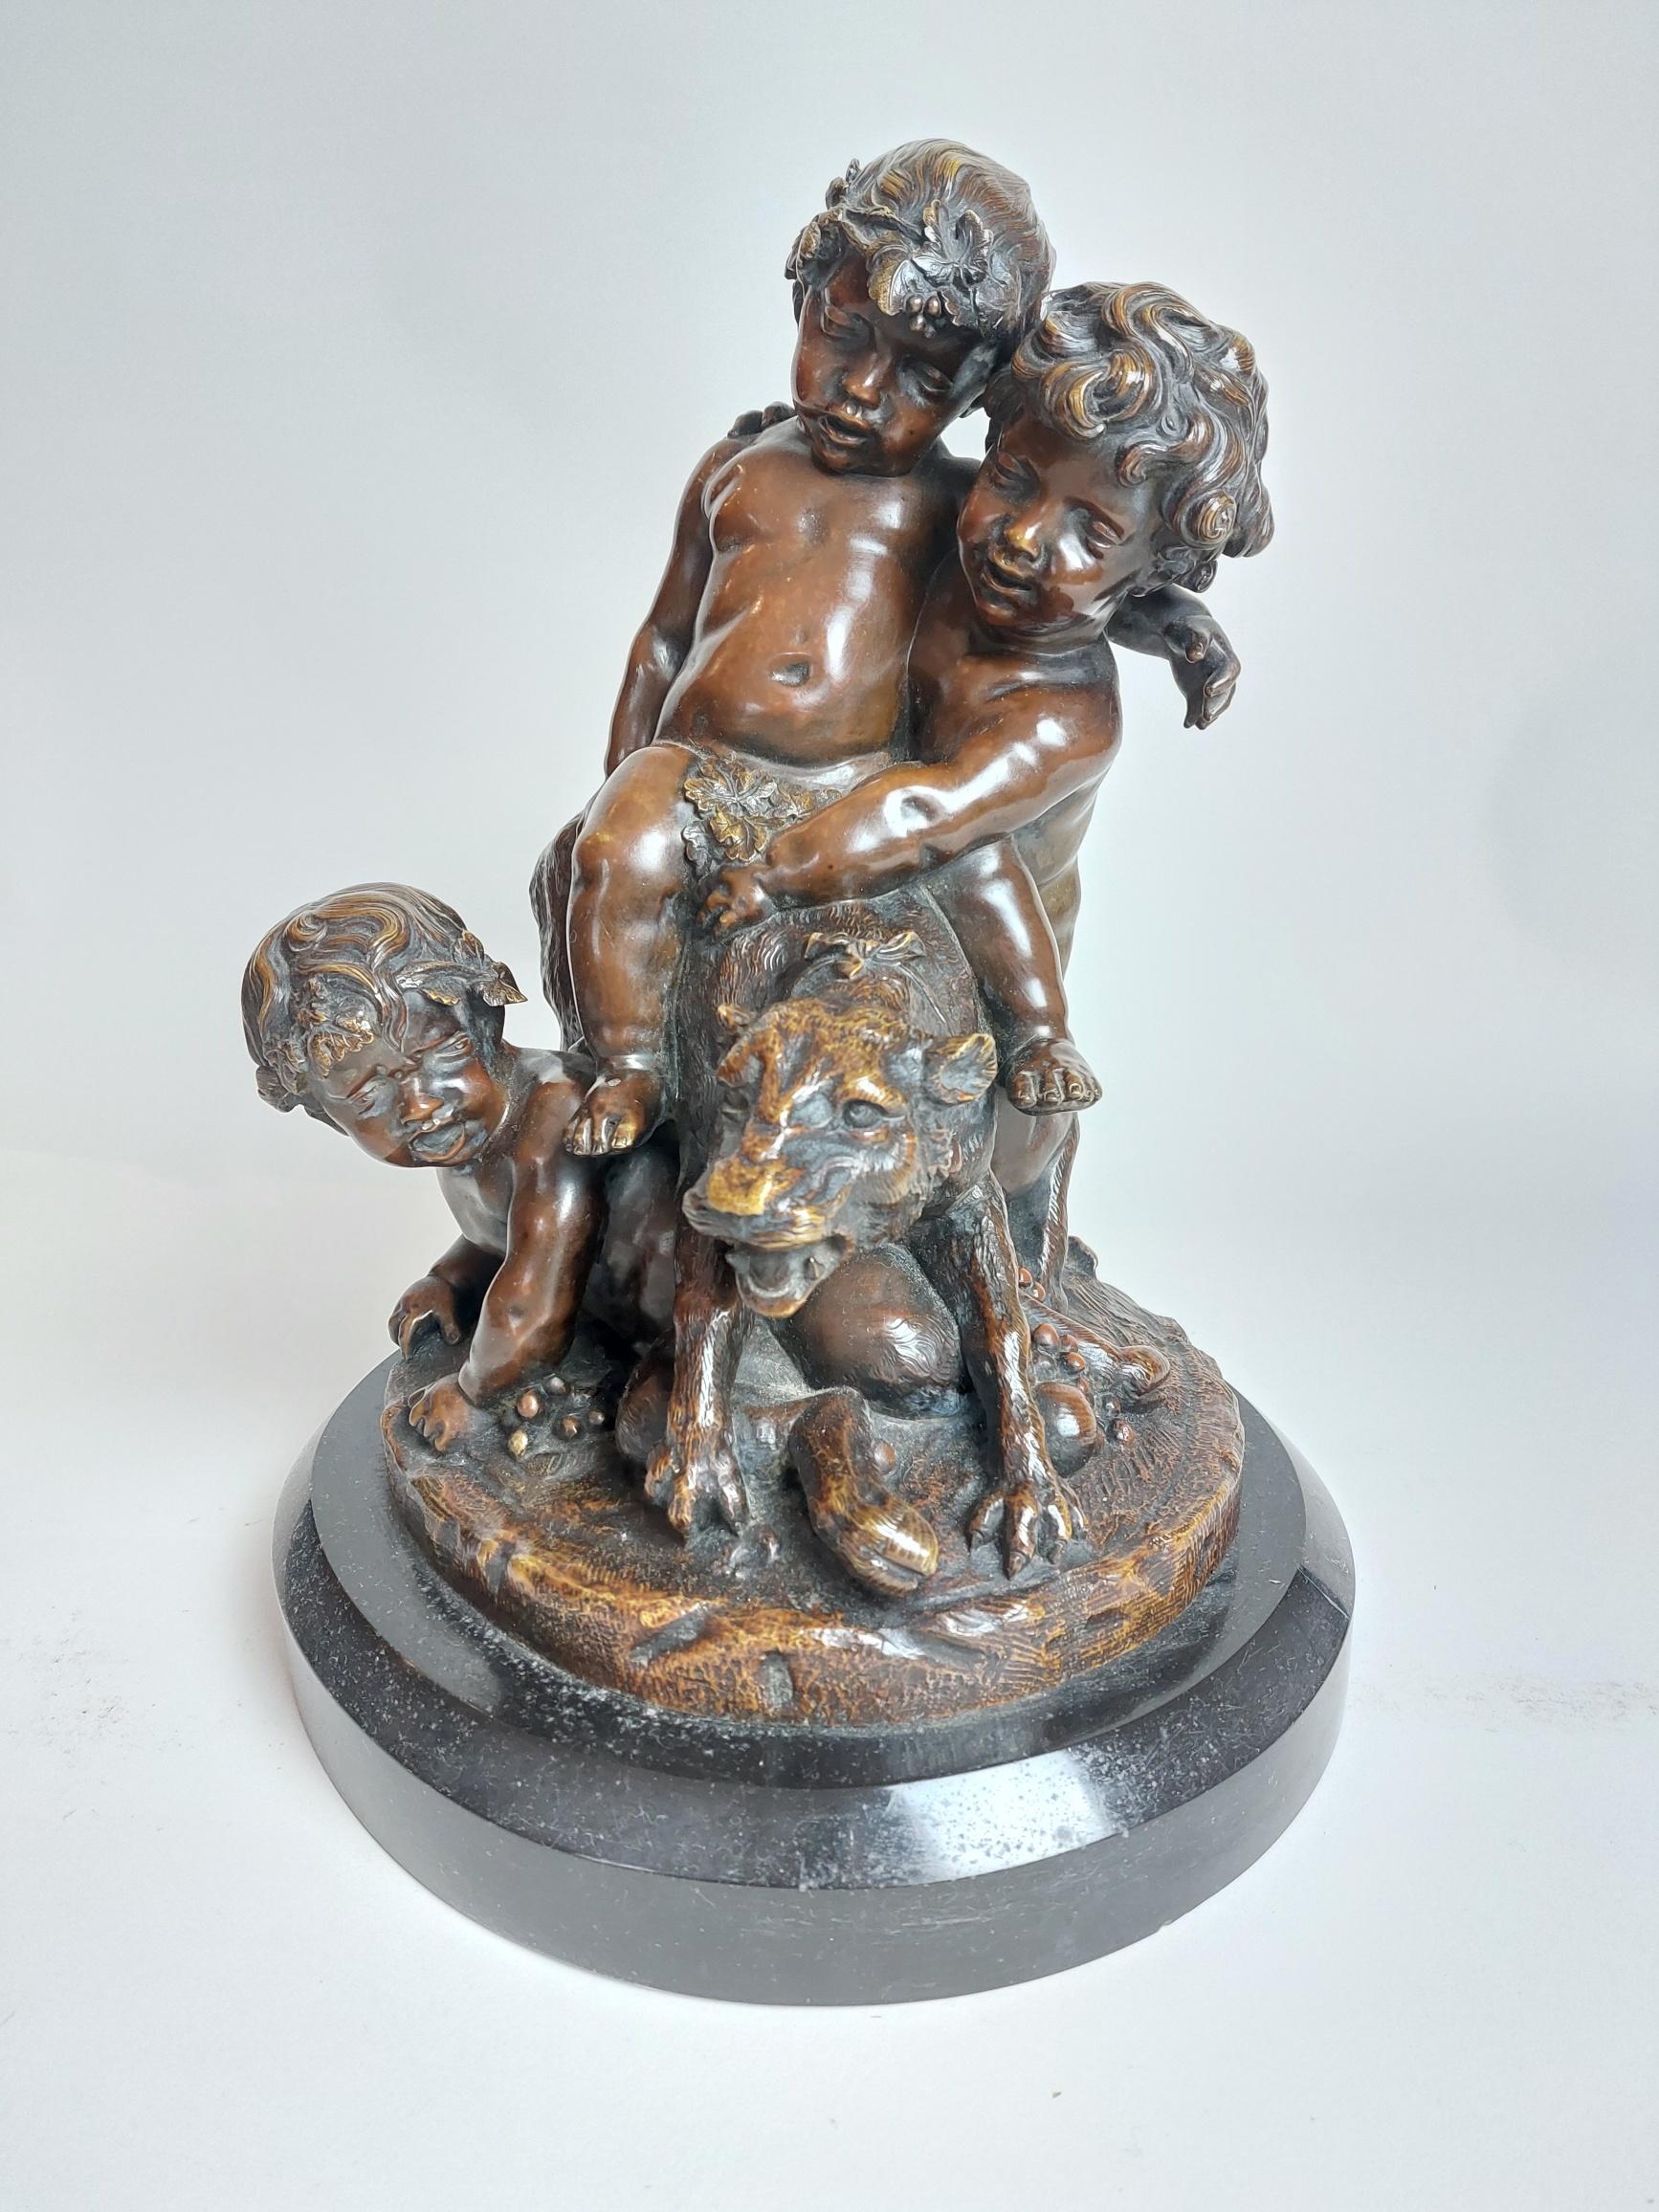 A 19th century French bronze of two cherubs and a fawn playing with a panther.
Signed By Victor Paillard on a marble base

The pather looks confused as two cherubs play and ride on its back, a young fawn lies beneath the big cat, perhaps he used